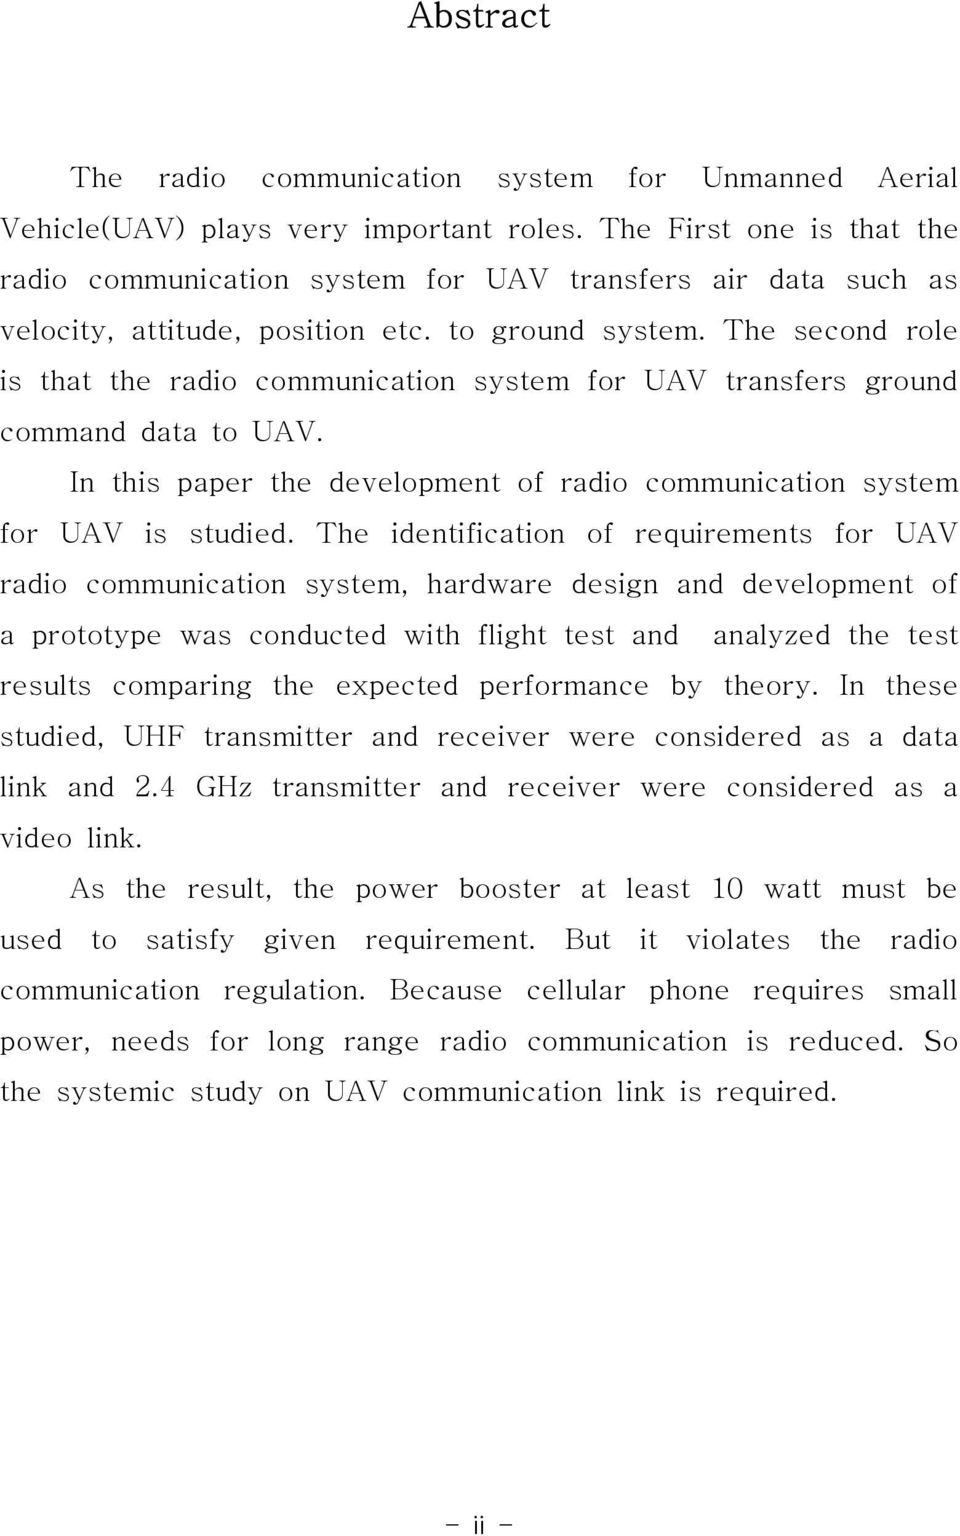 The second role is that the radio communication system for UAV transfers ground command data to UAV. In this paper the development of radio communication system for UAV is studied.